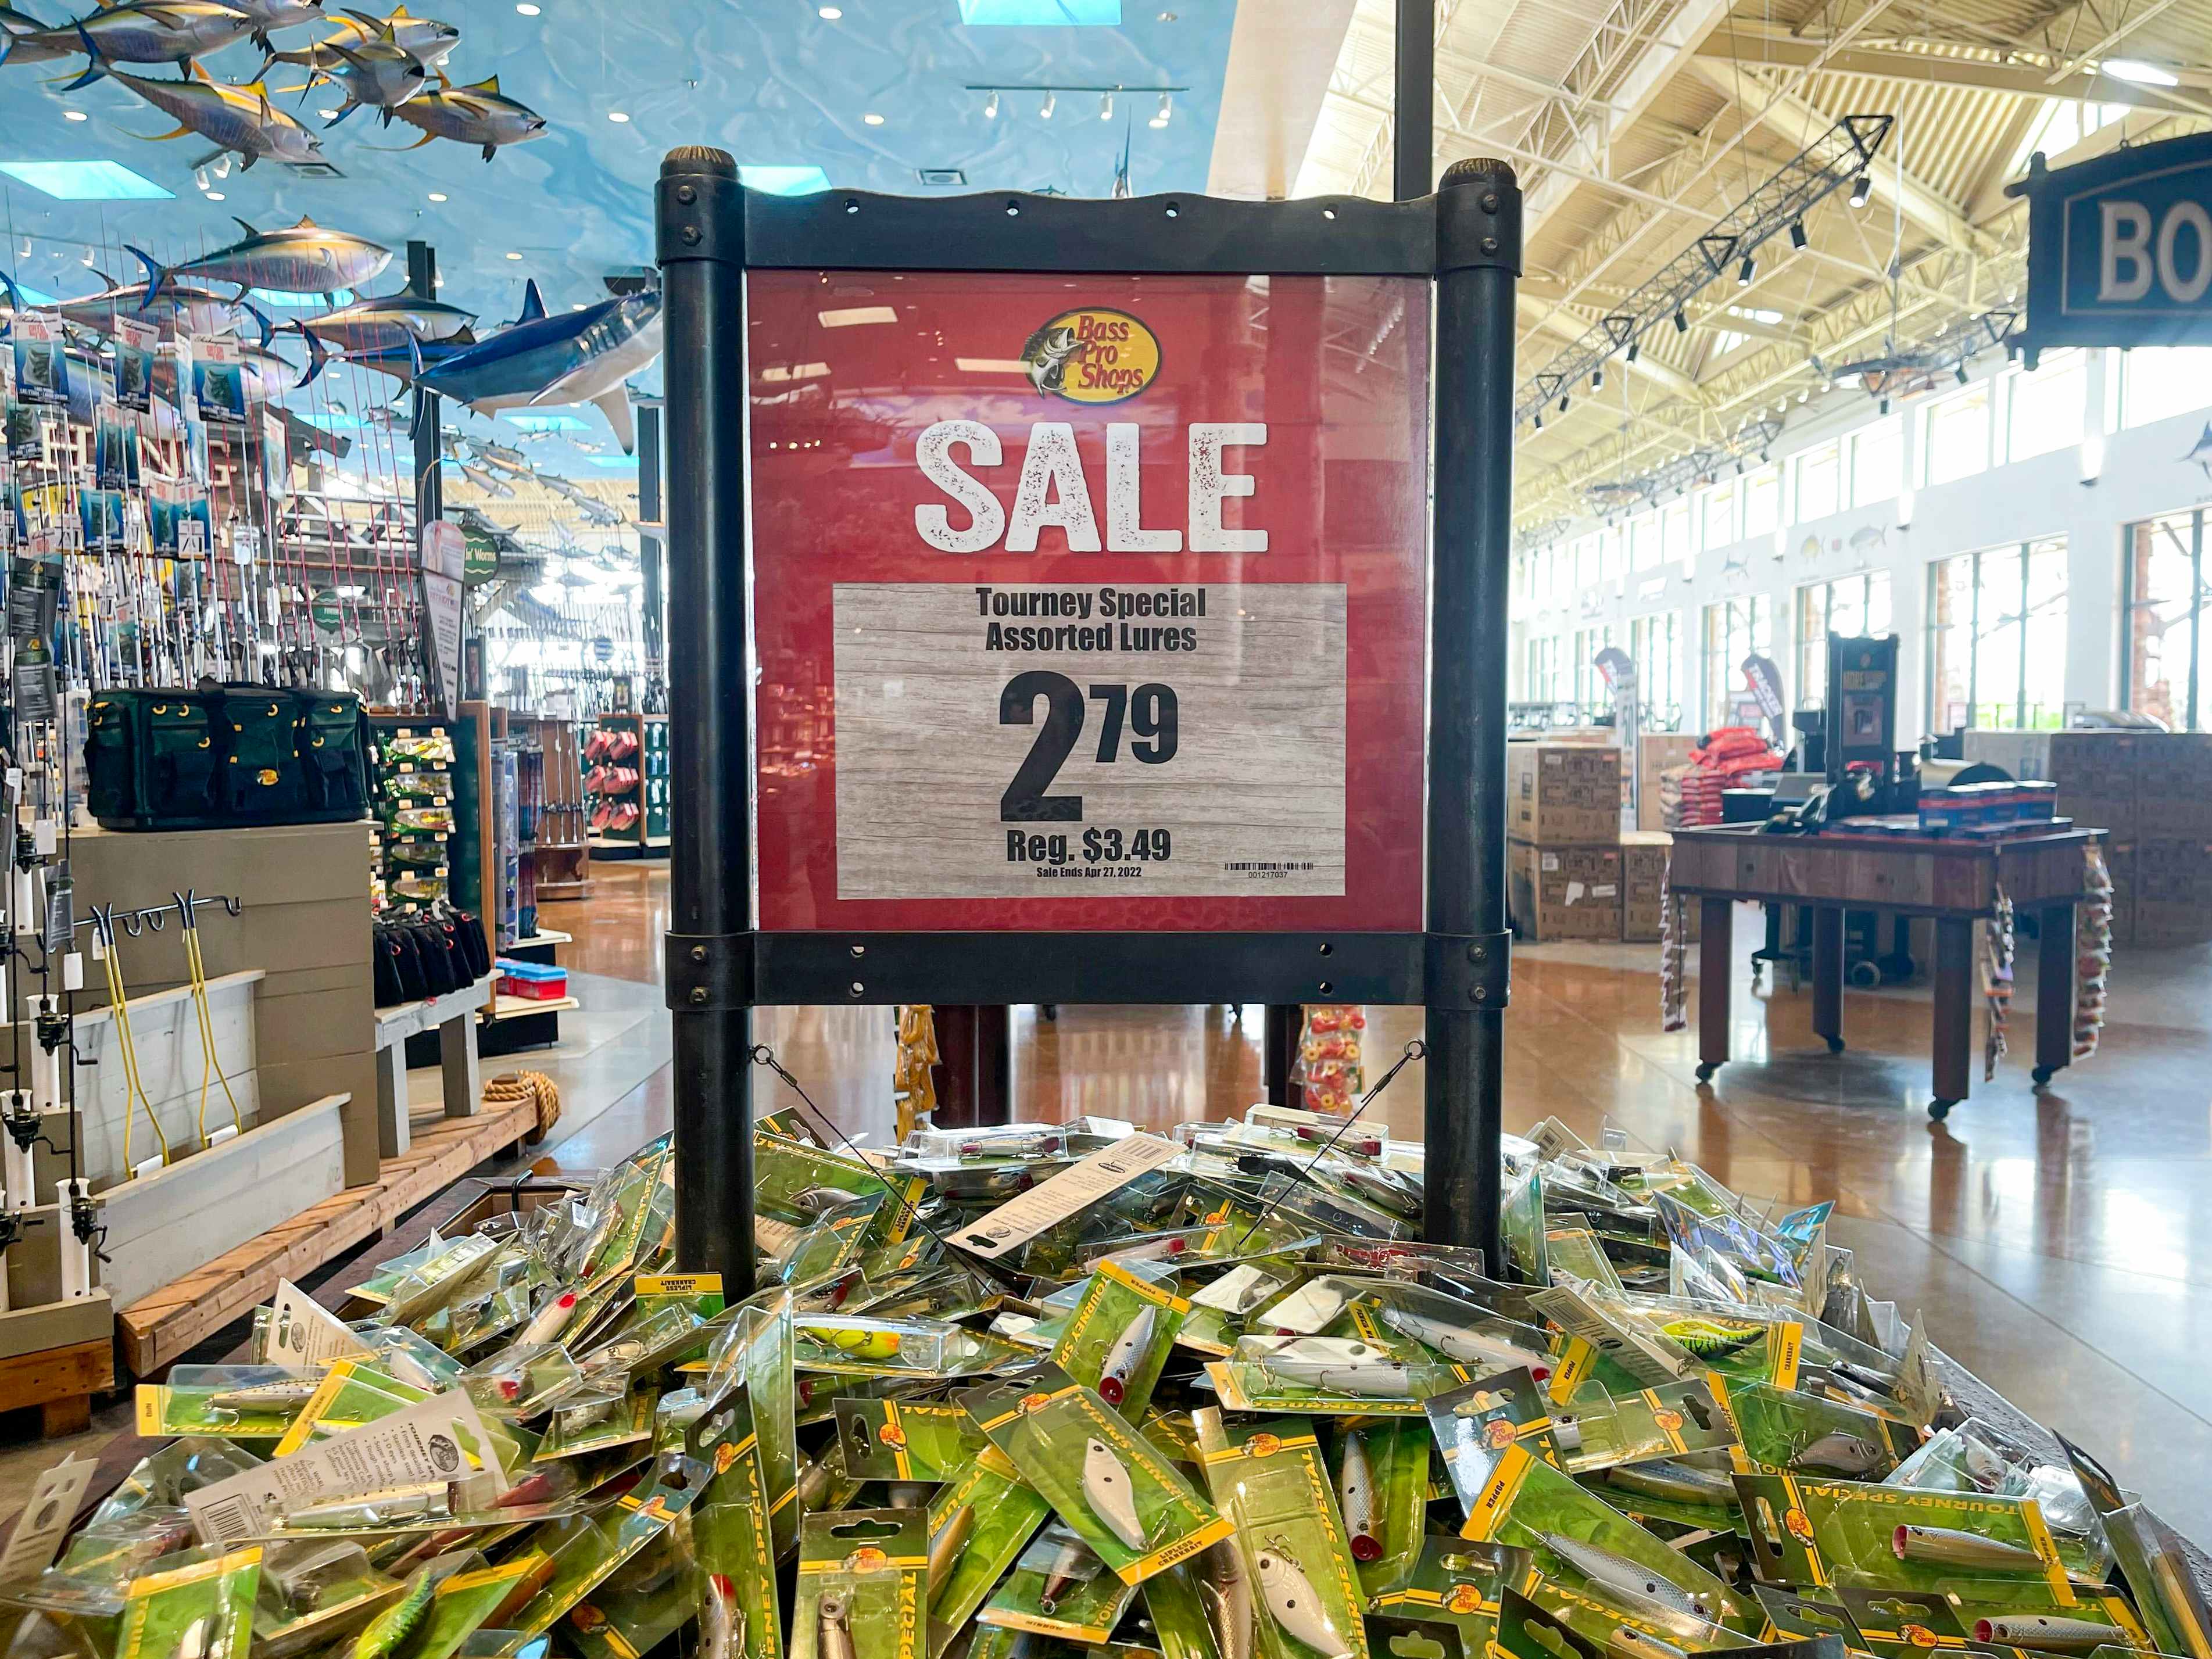 A display of lures that are on sale at Cabela's / Bass Pro Shops.